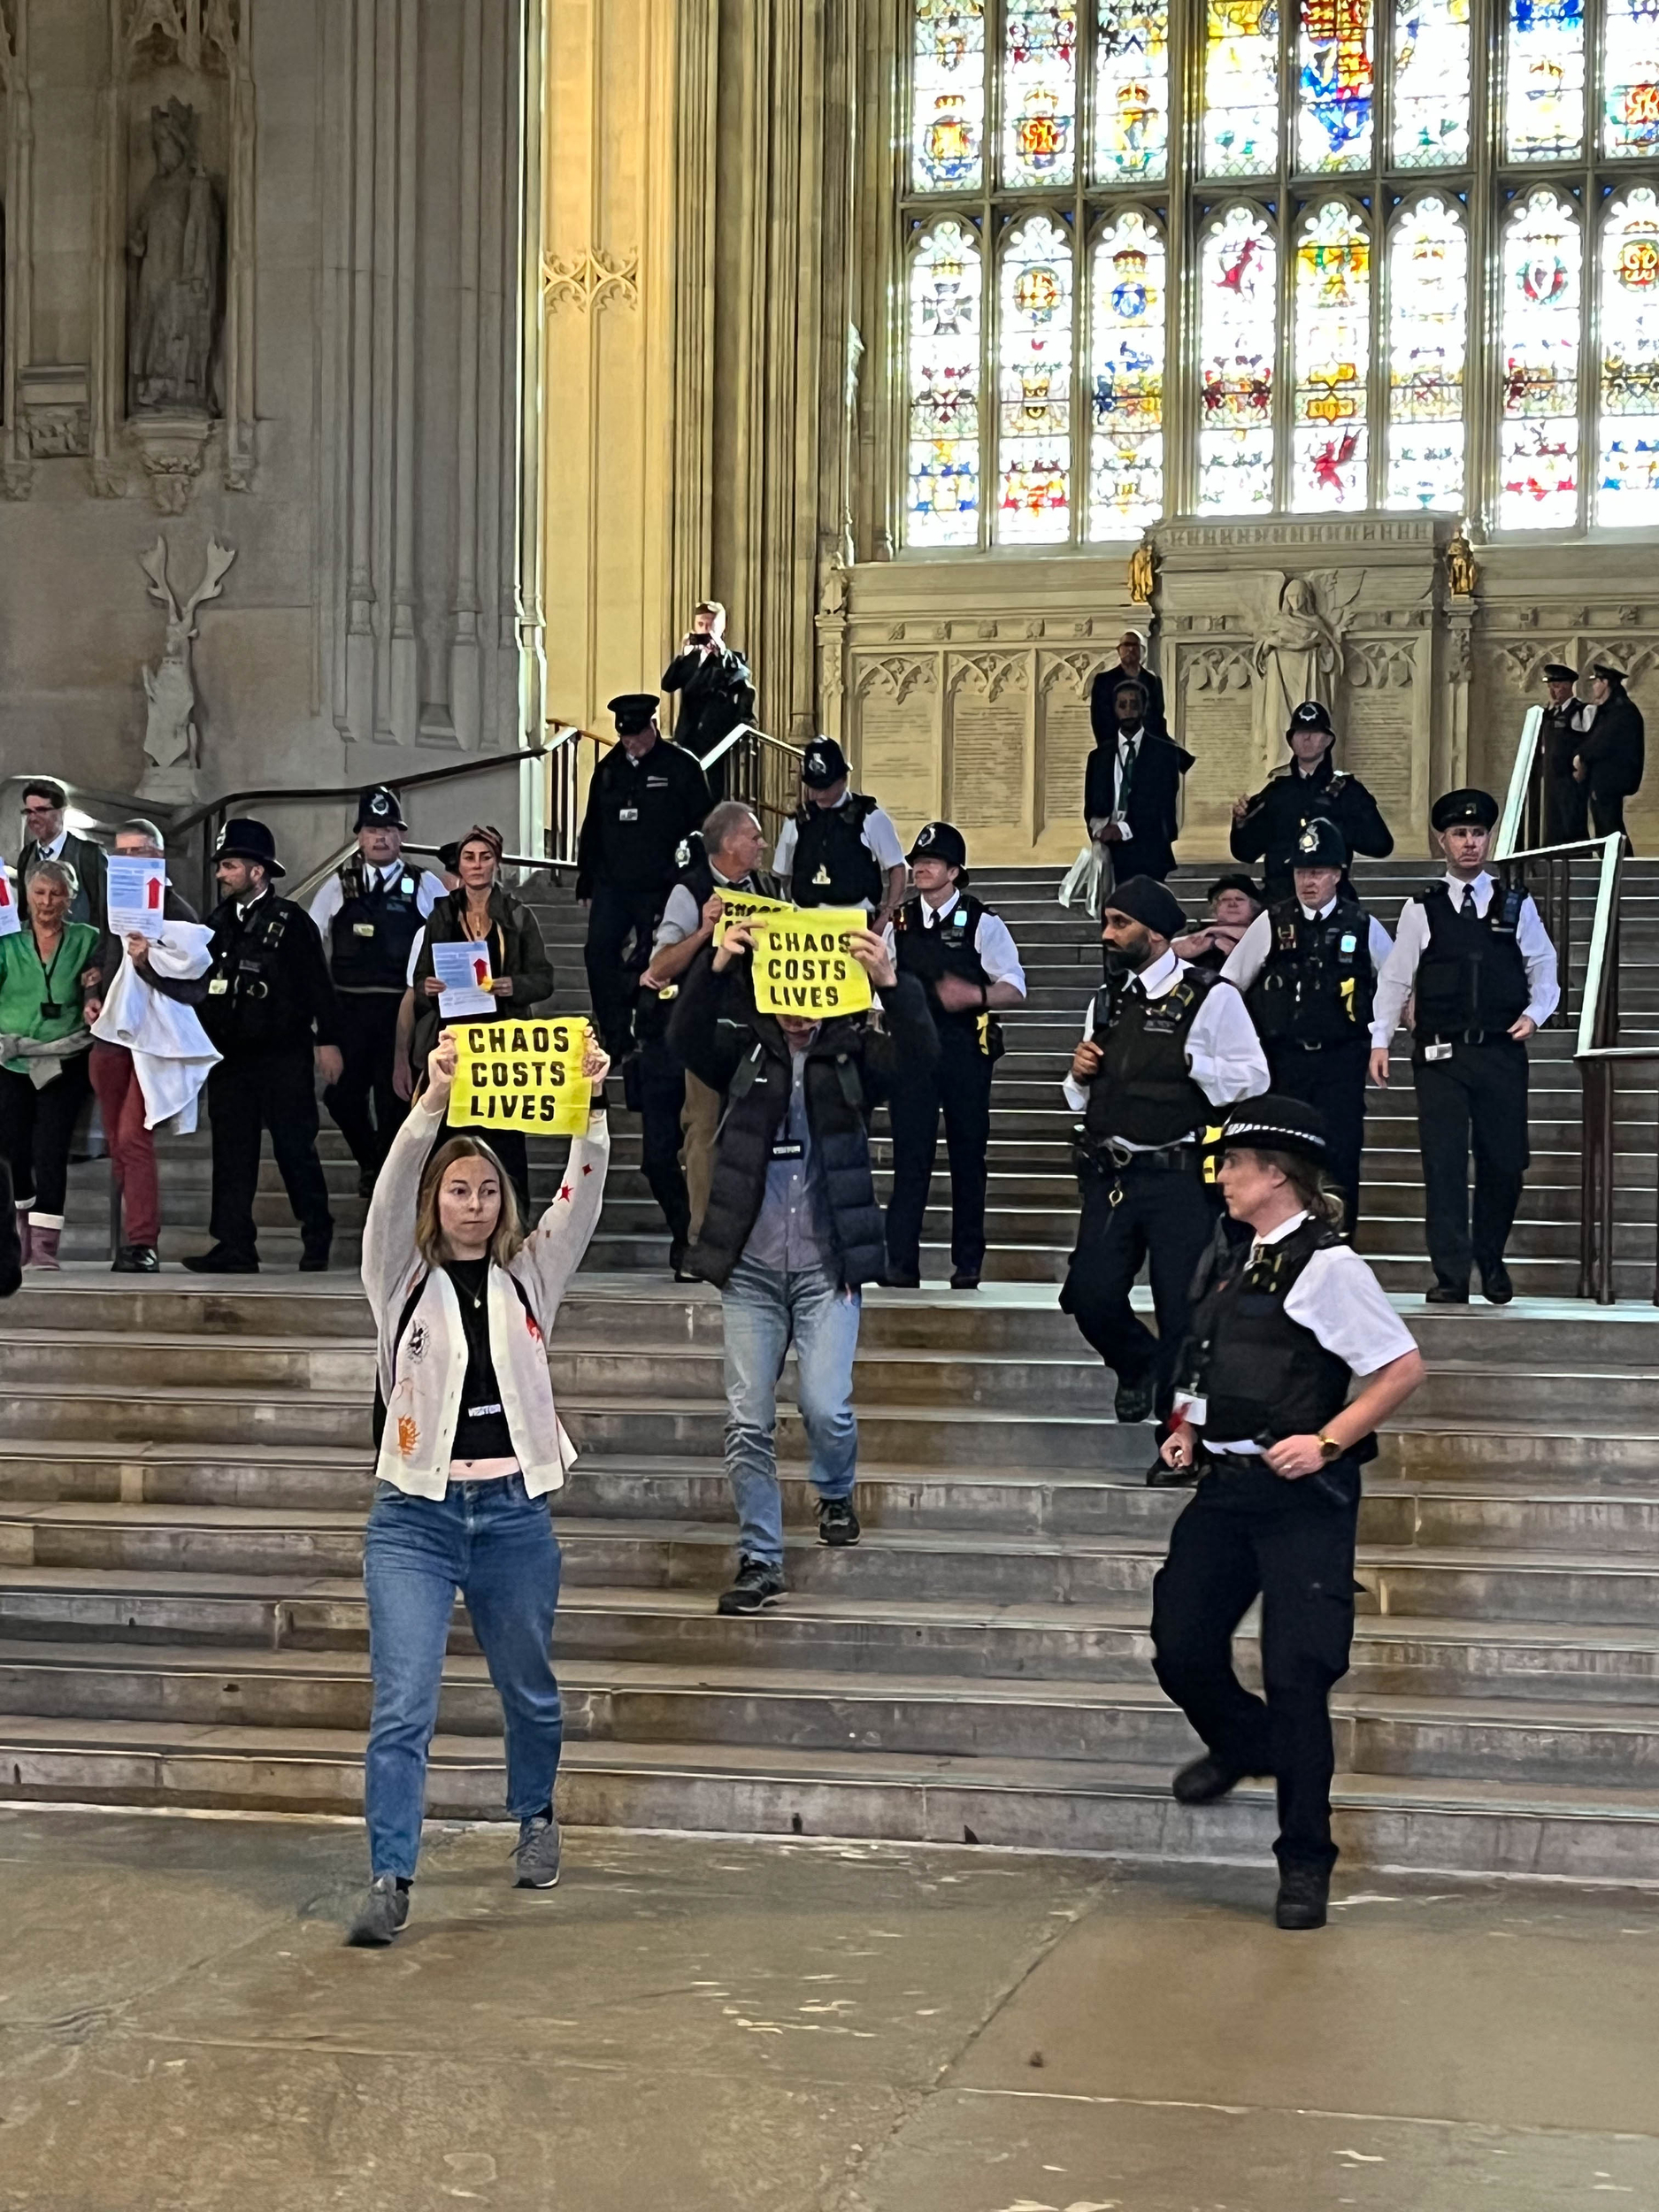 Activists holding 'chaos costs lives' signs while walking down steps by an ornate stained glass window in Parliament